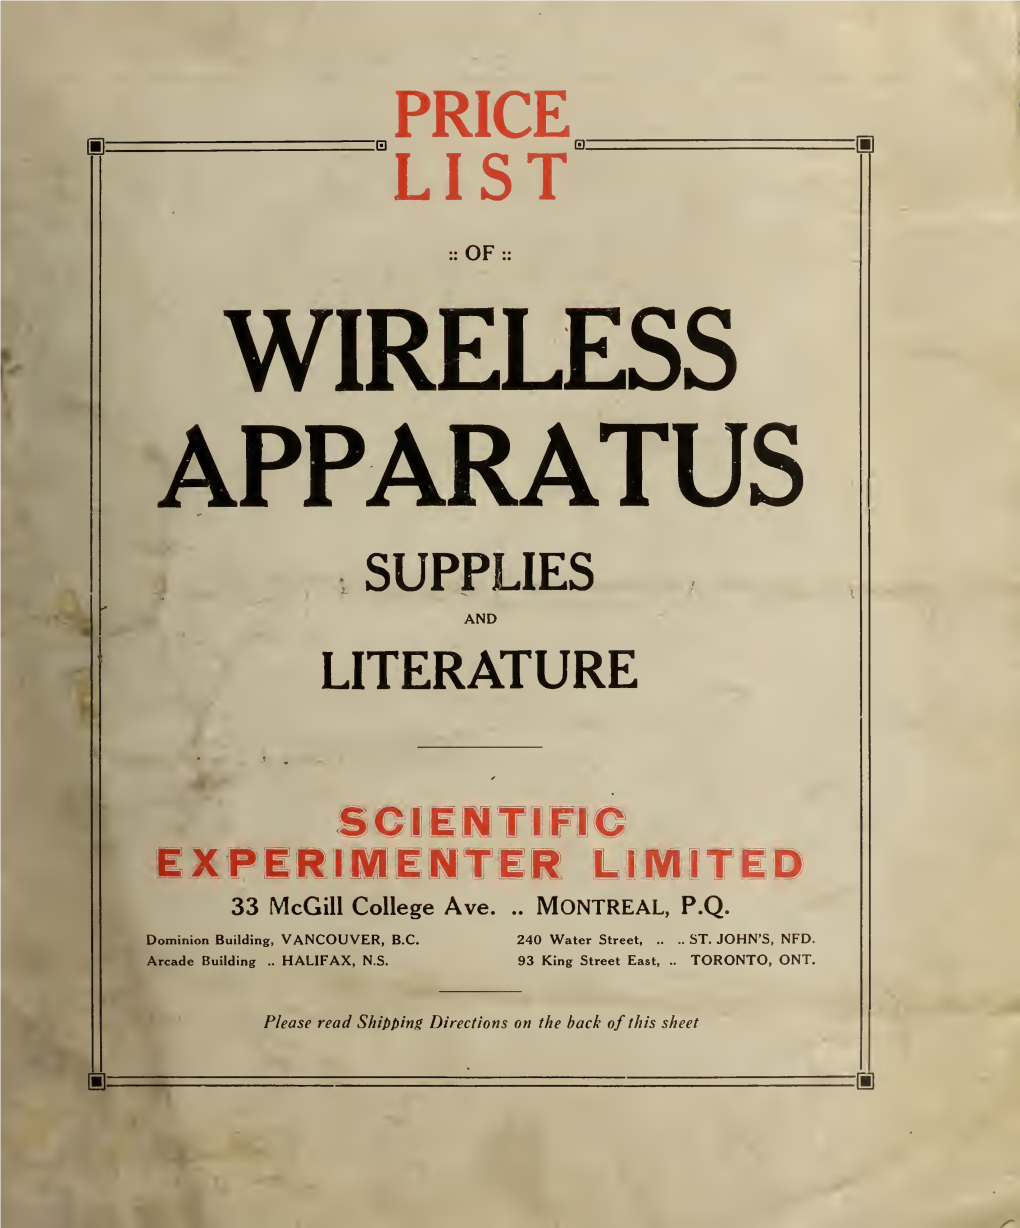 Price List of Wireless Apparatus Supplies and Literature